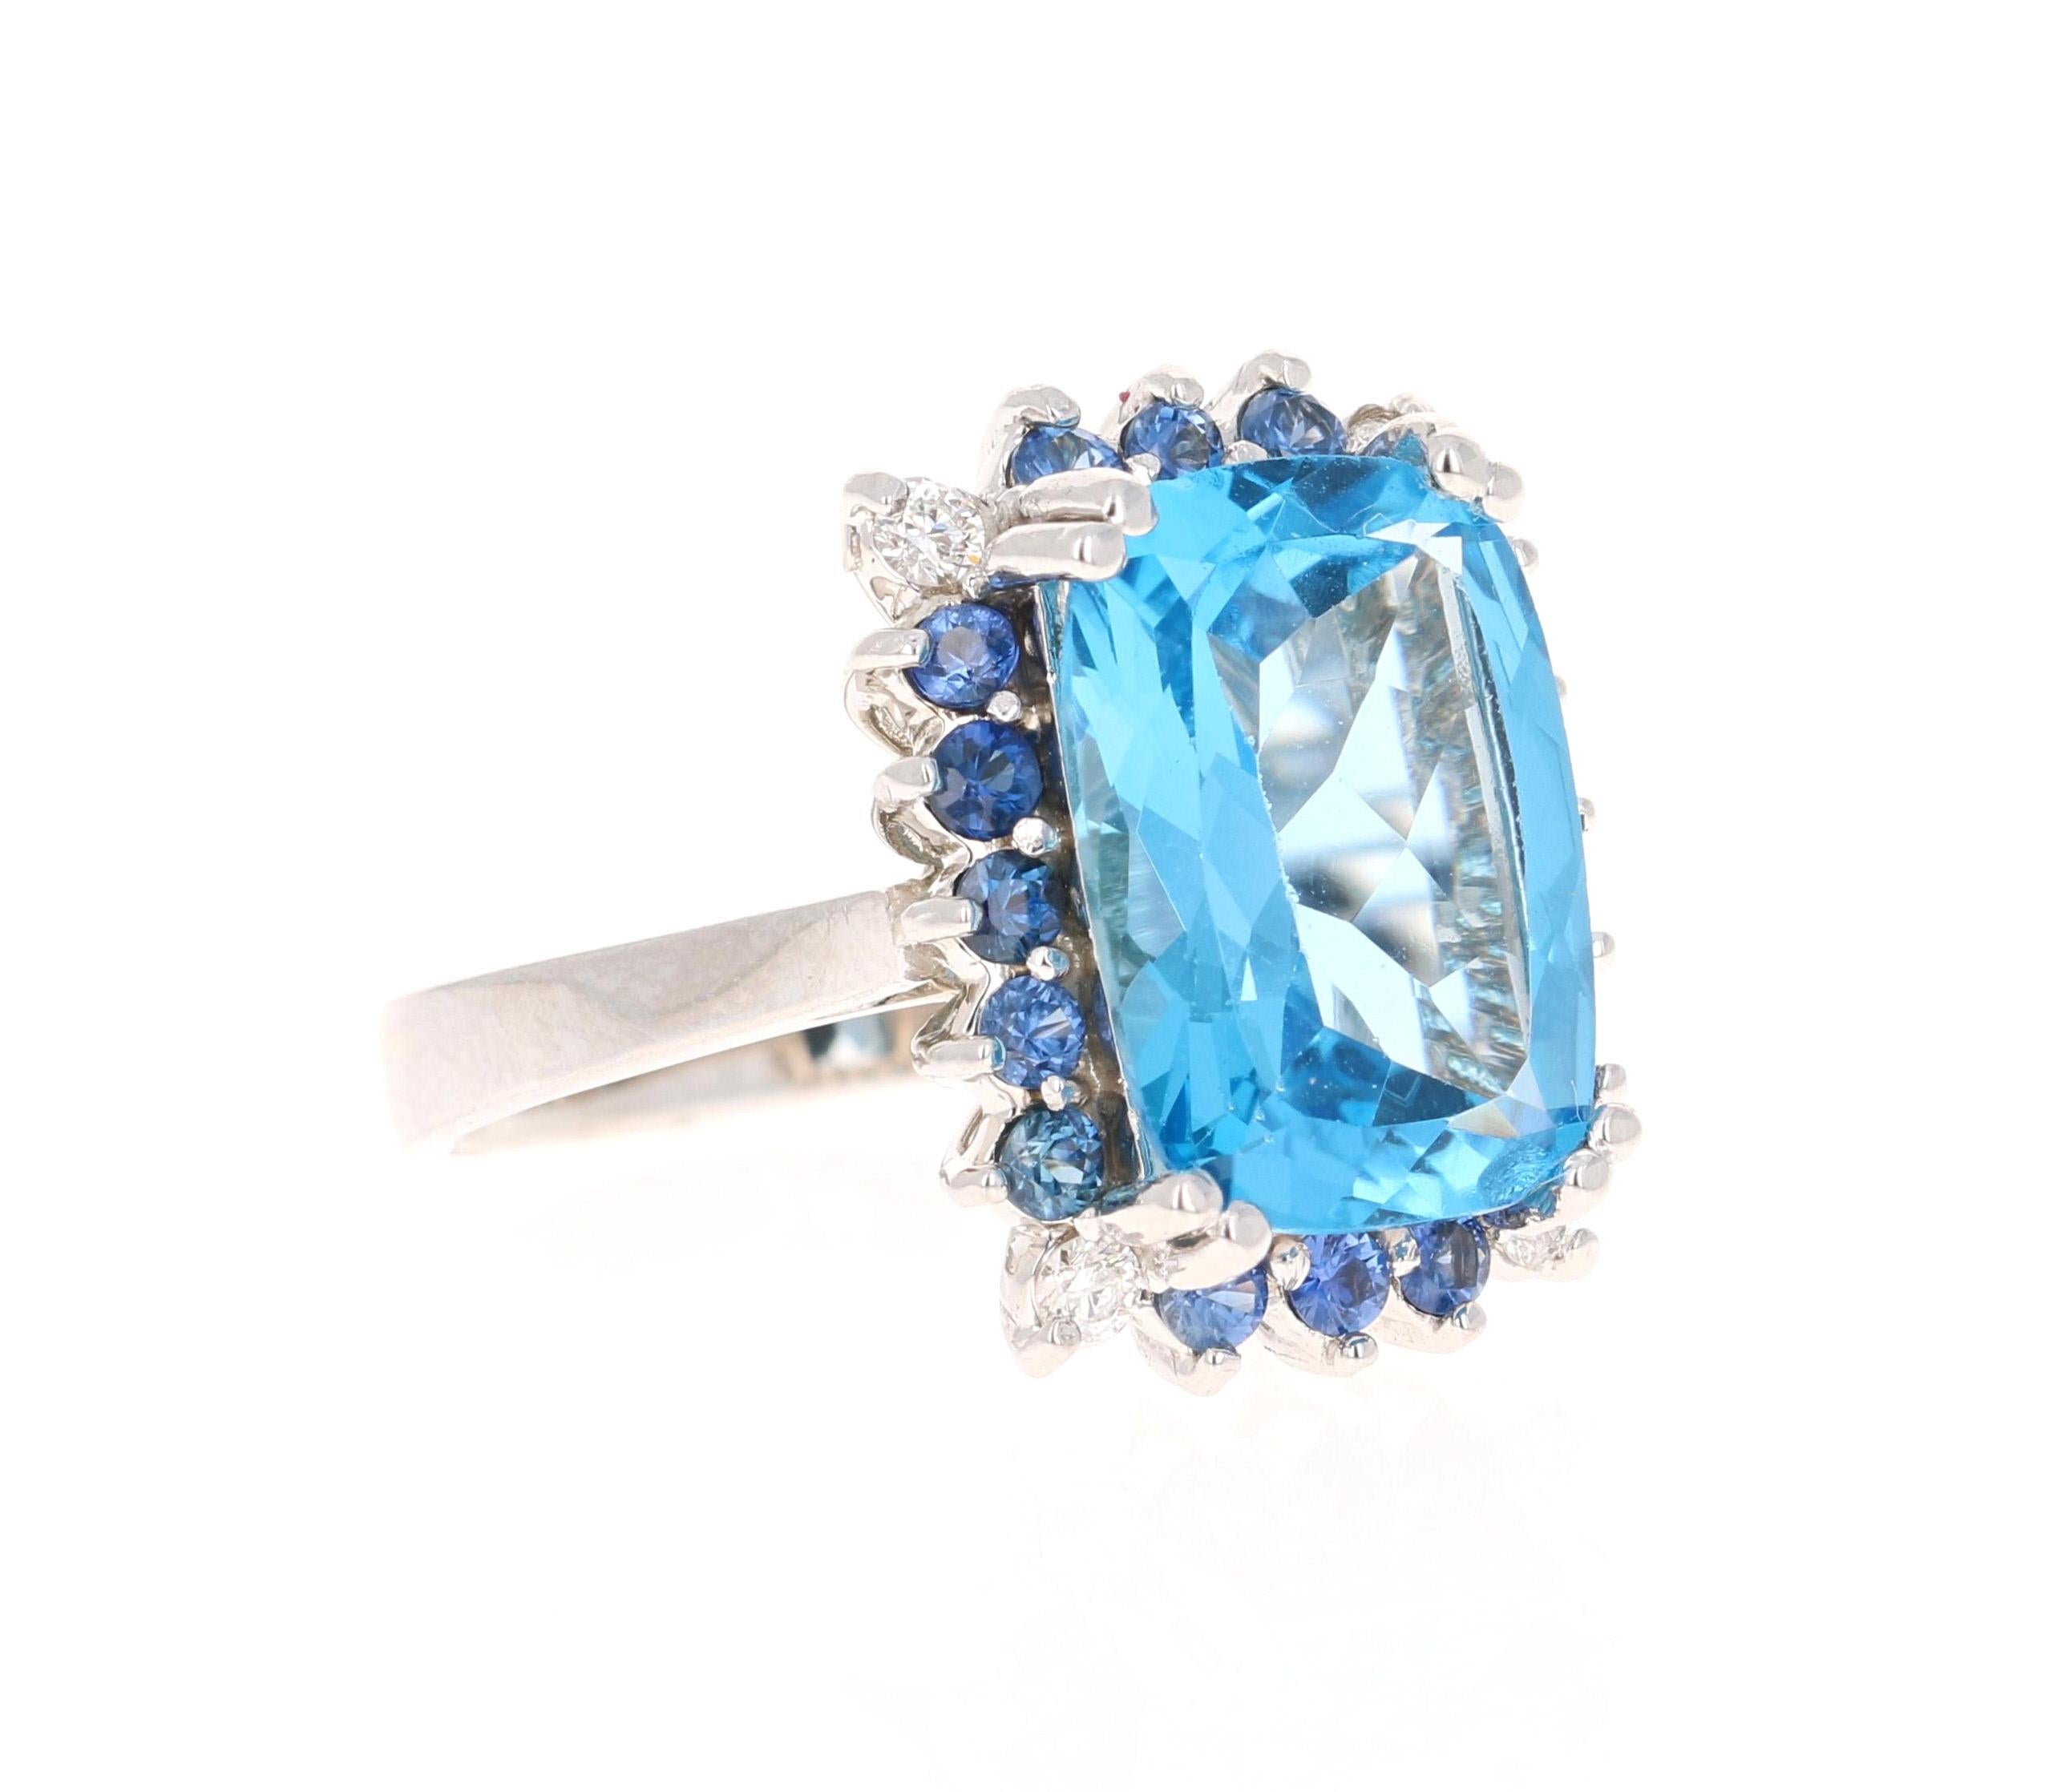 This stunning statement ring has a large Cushion Oval Cut Blue Topaz that weighs 6.70 carats. 
The blue topaz is 11 mm x 15 mm. 
It is surrounded by a halo of 4 Round Cut Diamonds that weigh 0.12 carats with a clarity of SI and color of F. It also